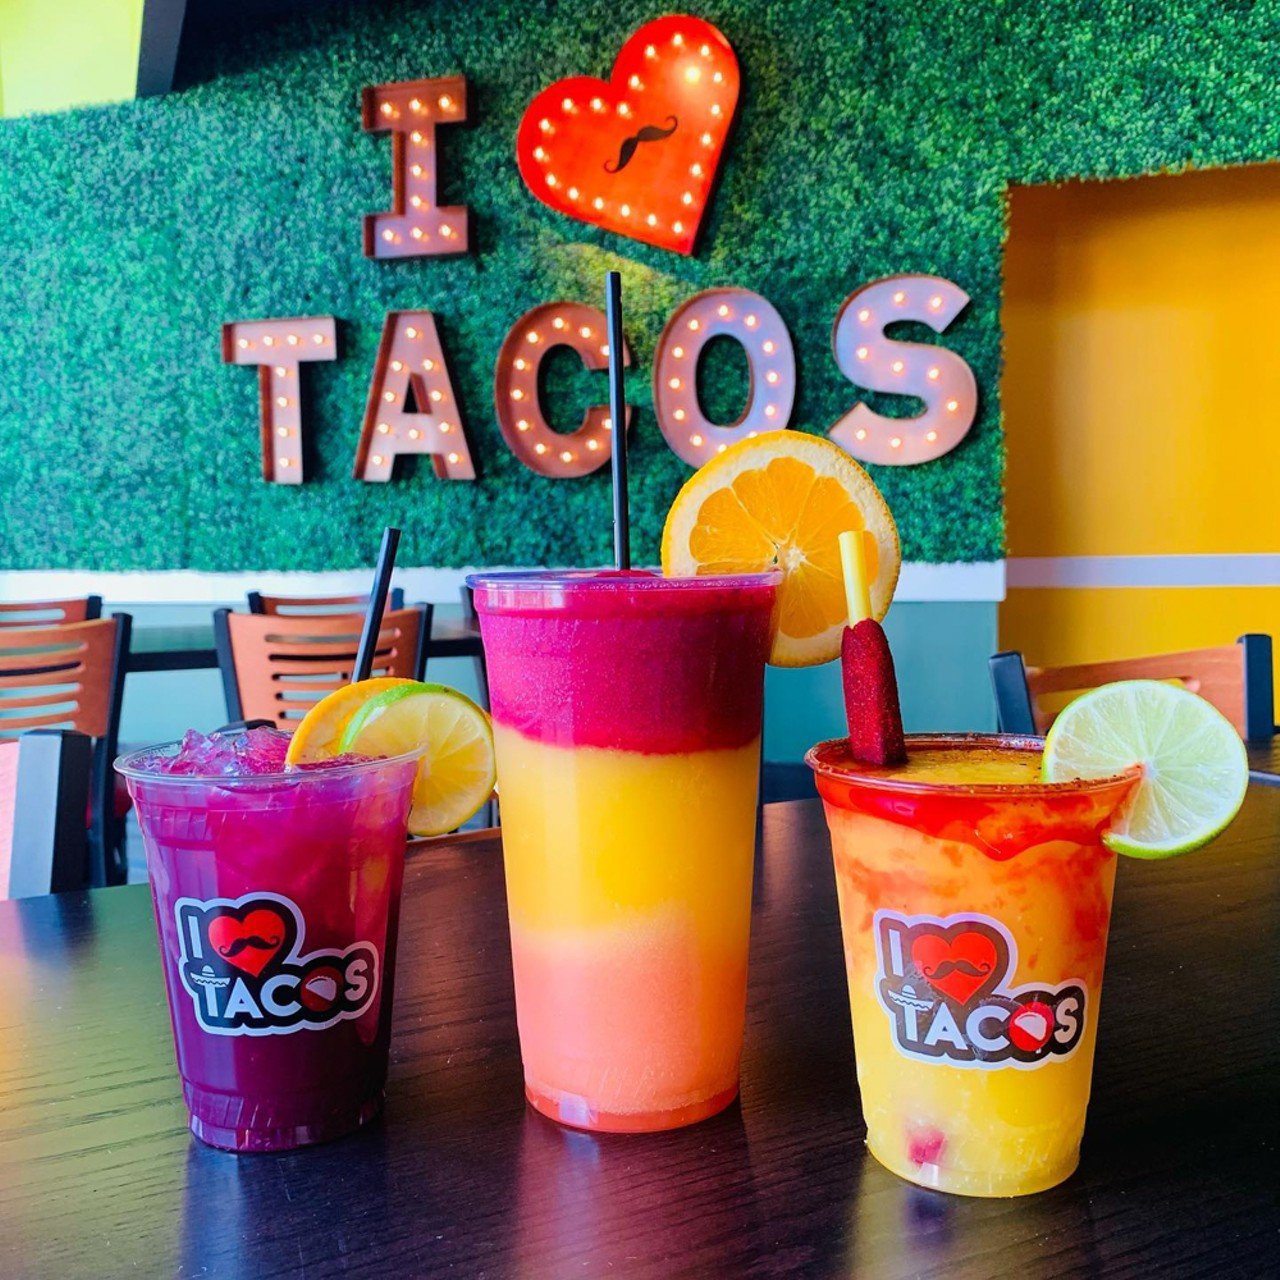  I Love Tacos 
9099 Taylorsville Road, 1534 Bardstown Road, 3550 Springhurst Commons Drive 
This local chain is a hit for its food (we particularly recommend the quesadilla birria), but the bright colors and lit-up greenery wall at each location also lend themselves to cute Instagram shots.
Photo via ilovetacoslouisville/Instagram